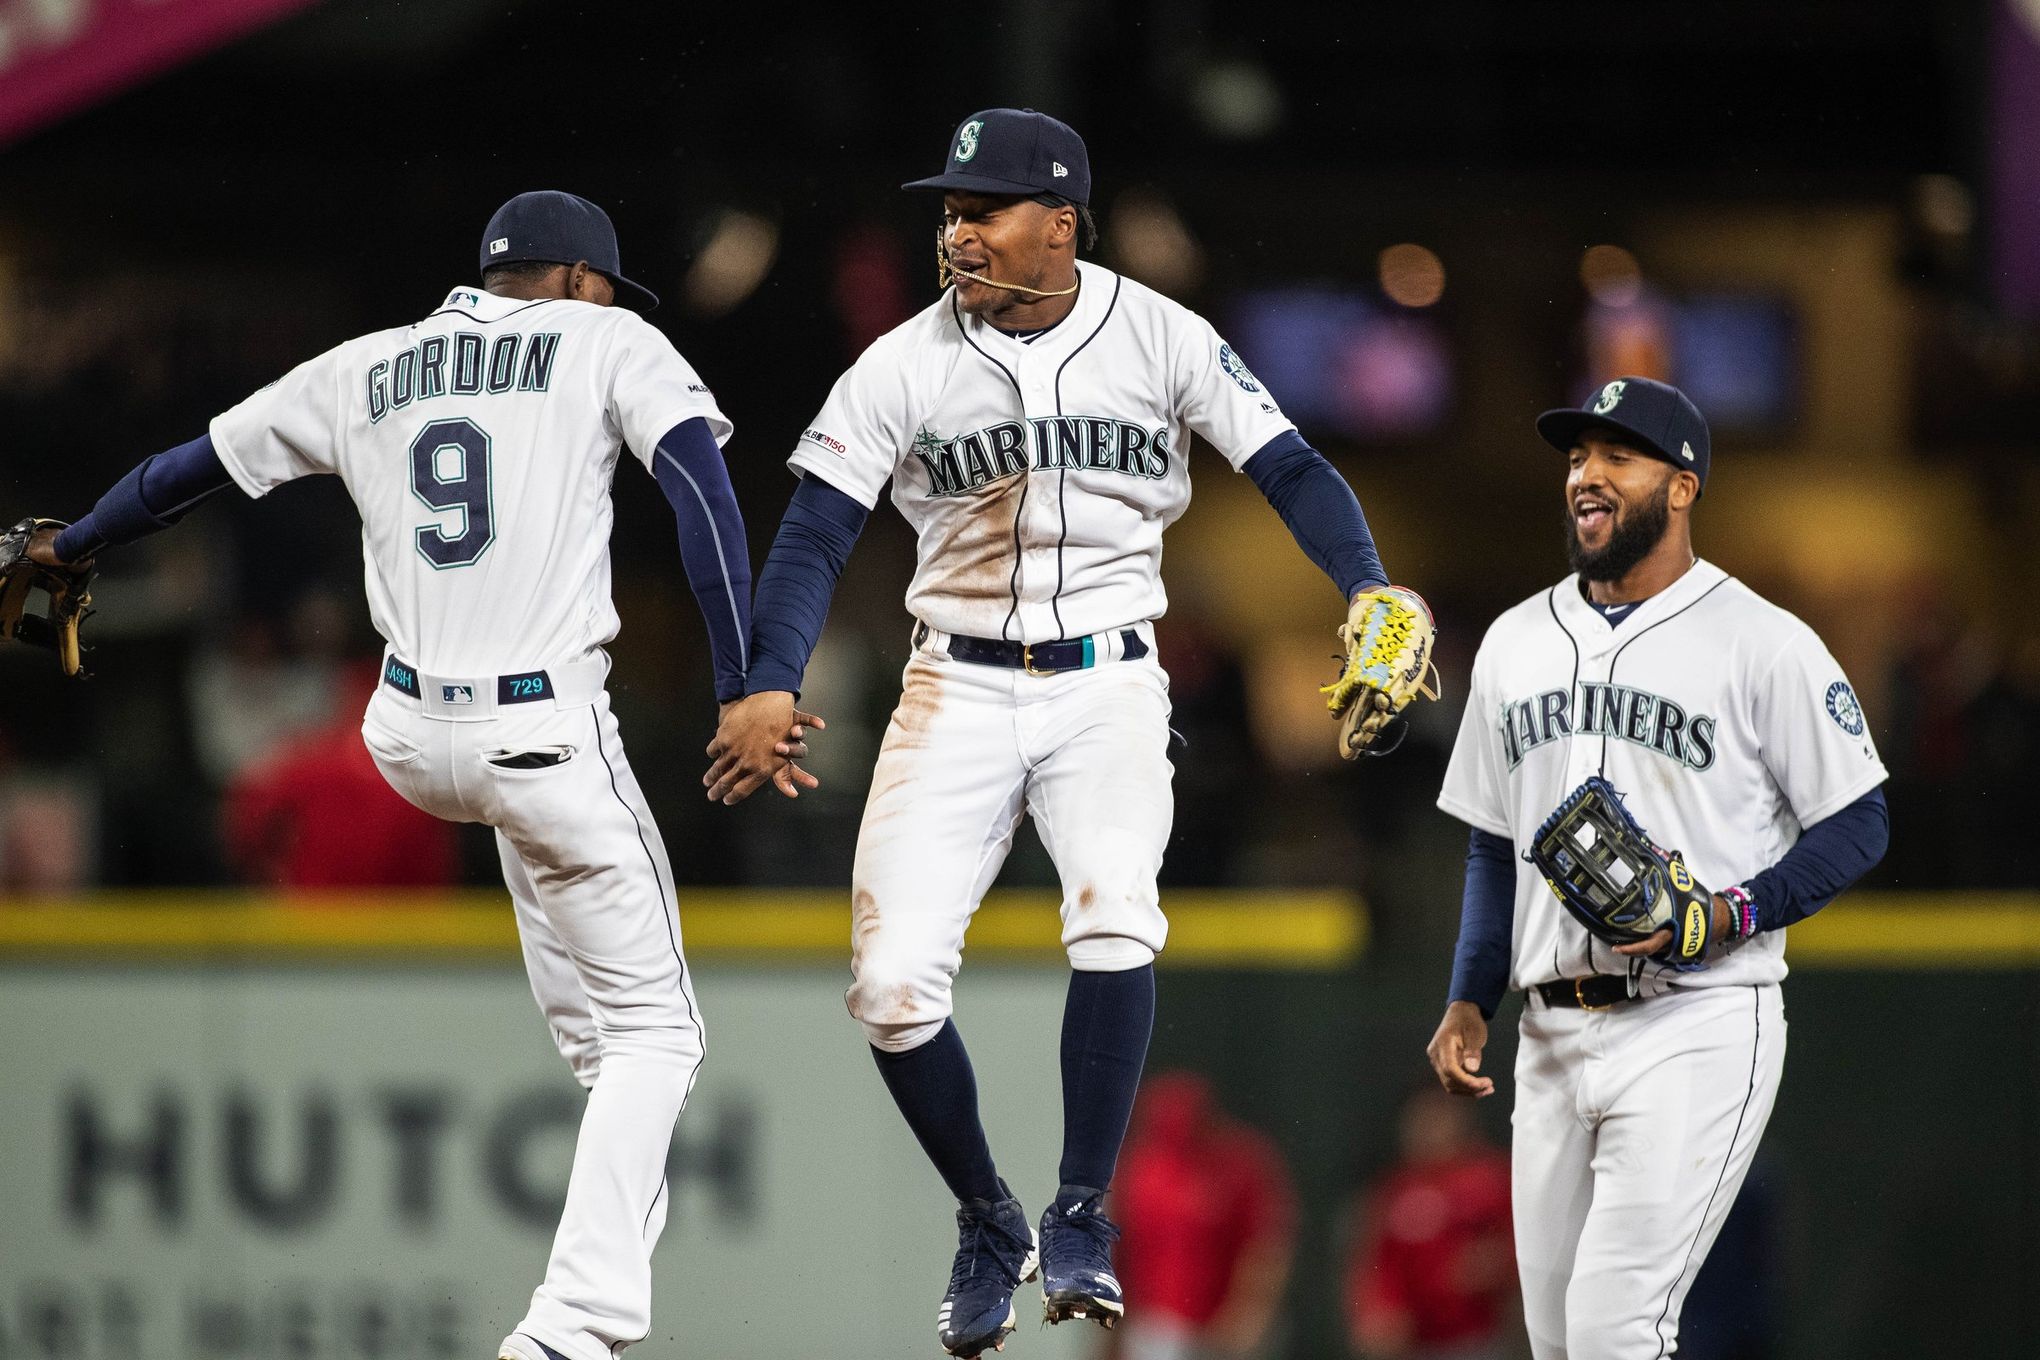 Mariners squander fantastic return by Marco Gonzales